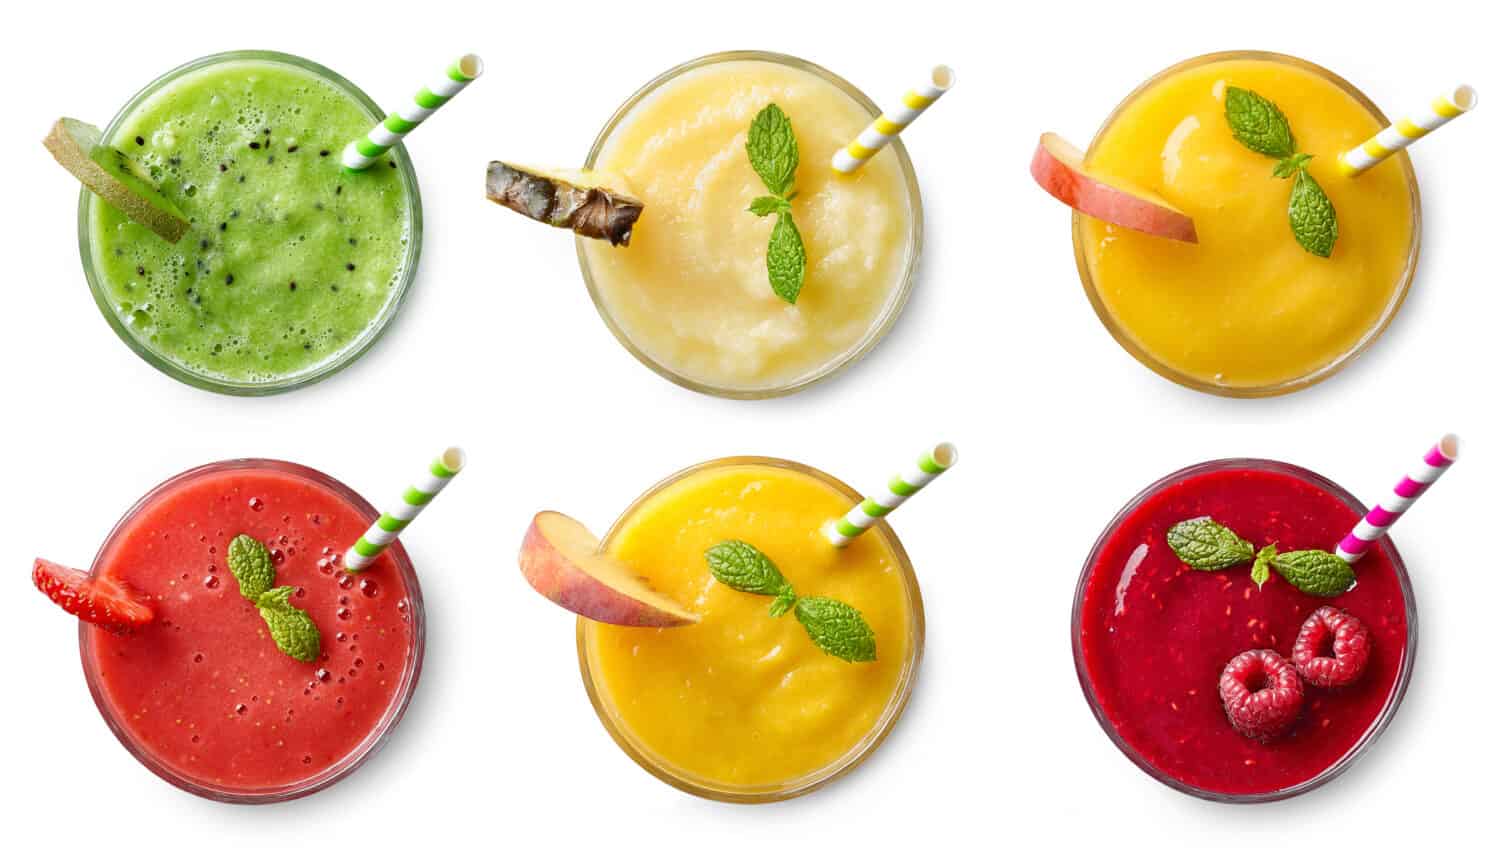 Set of various fresh fruit smoothies isolated on white background. Top view